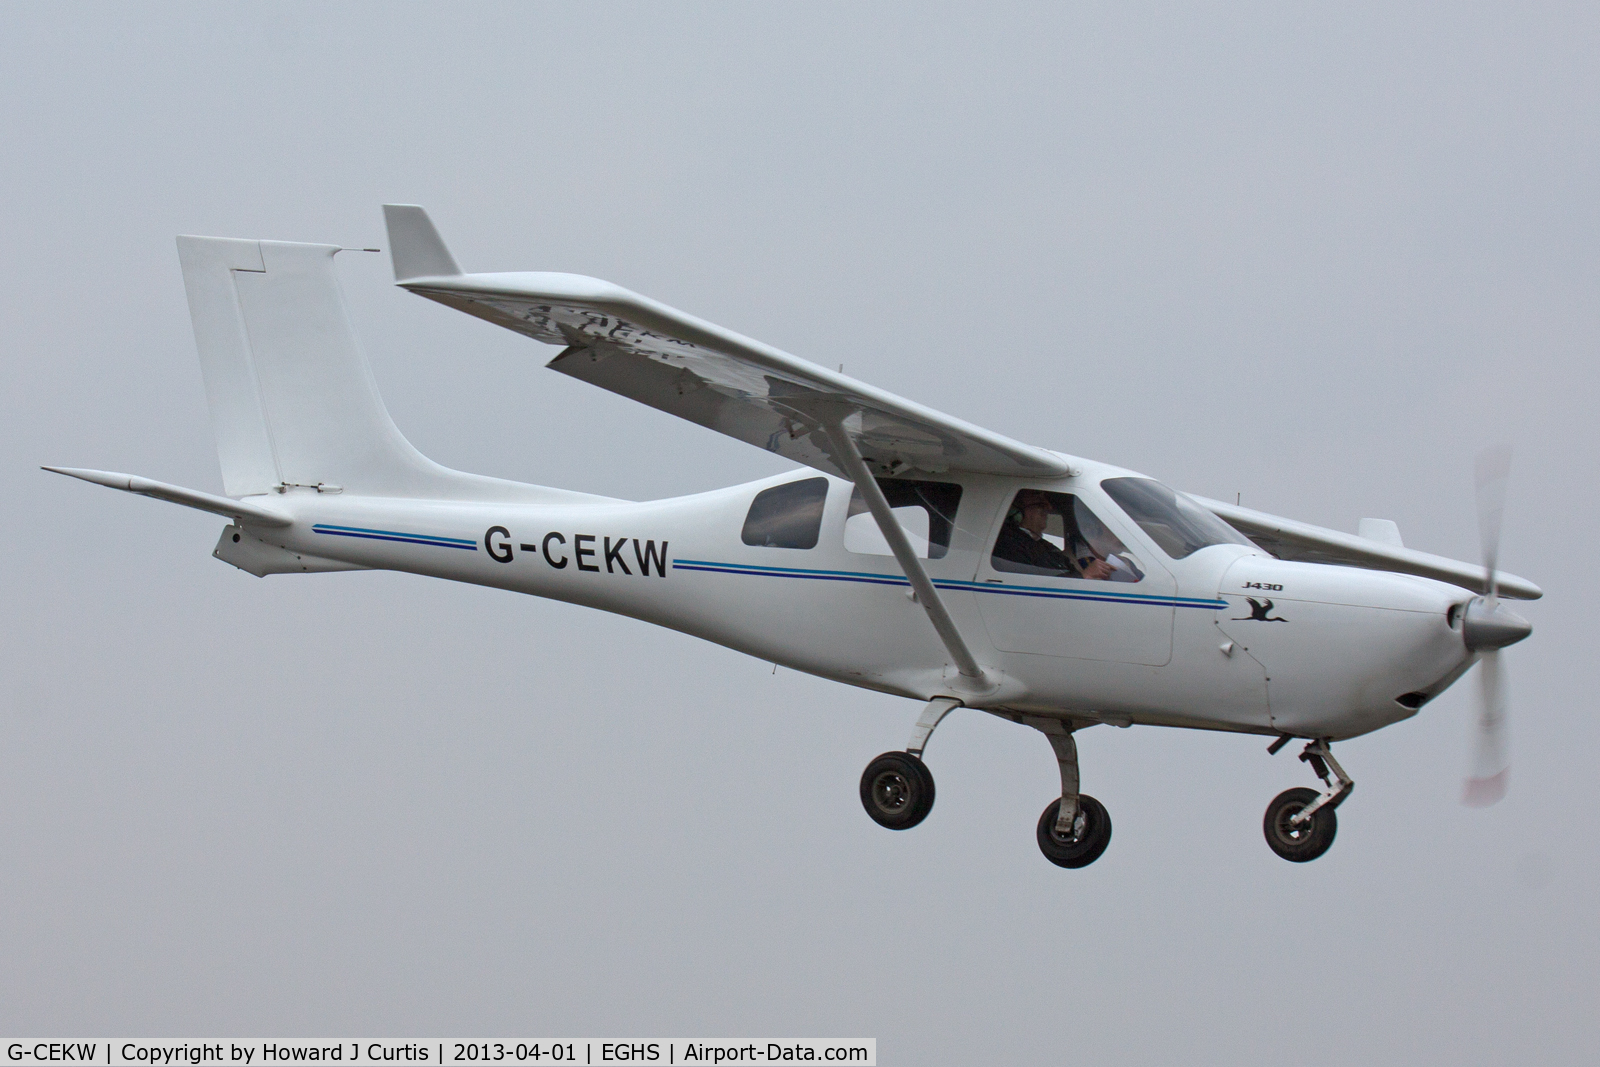 G-CEKW, 2007 Jabiru J430 C/N PFA 336-14340, At the LAA Fly-In and HMS Dipper 70th Anniversary Event. Privately owned.